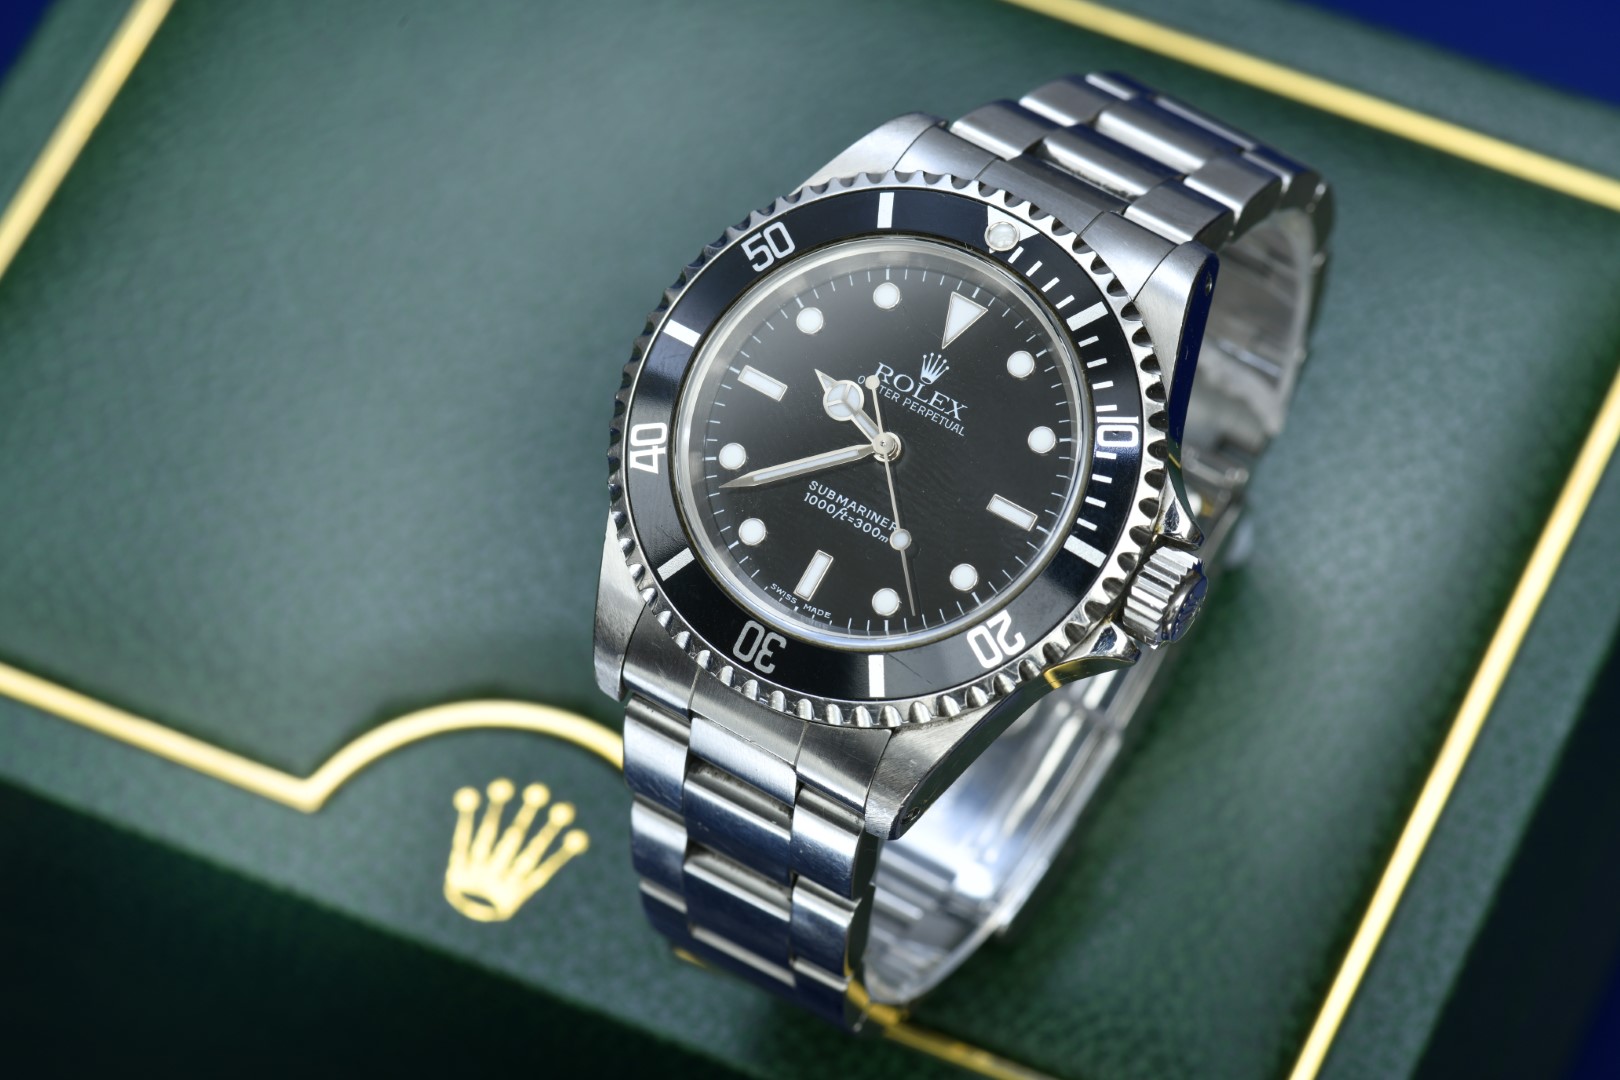 Rolex Oyster perpetual Submariner gentleman's wristwatch ref. 14060M with luminous hands and hour